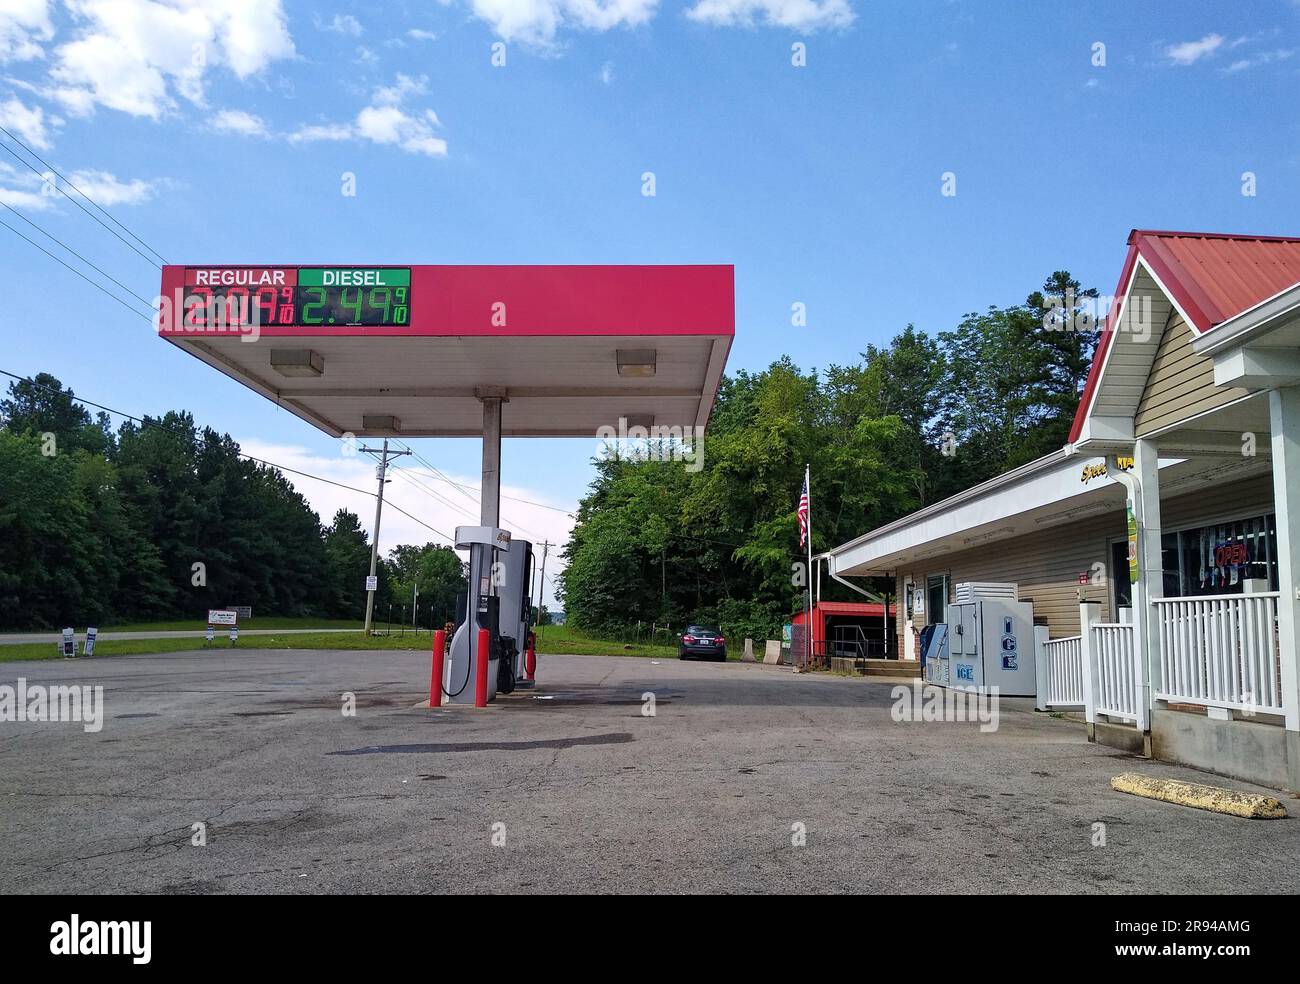 Current fuel prices for diesel and regular unleaded gasoline are displayed on a gas station awning amid an empty parking lot on Wednesday, June 24, 2020 at the Speedy Mart convenience store in Falls of Rough, Grayson County, KY, USA. The rate at which gas prices are increasing across the country is slowing, according to a report released by the American Automobile Association, with the national average cost of a gallon of unleaded gasoline increasing by three cents to $2.13 for the week ended June 22, 2020. (Apex MediaWire Photo by Billy Suratt) Stock Photo